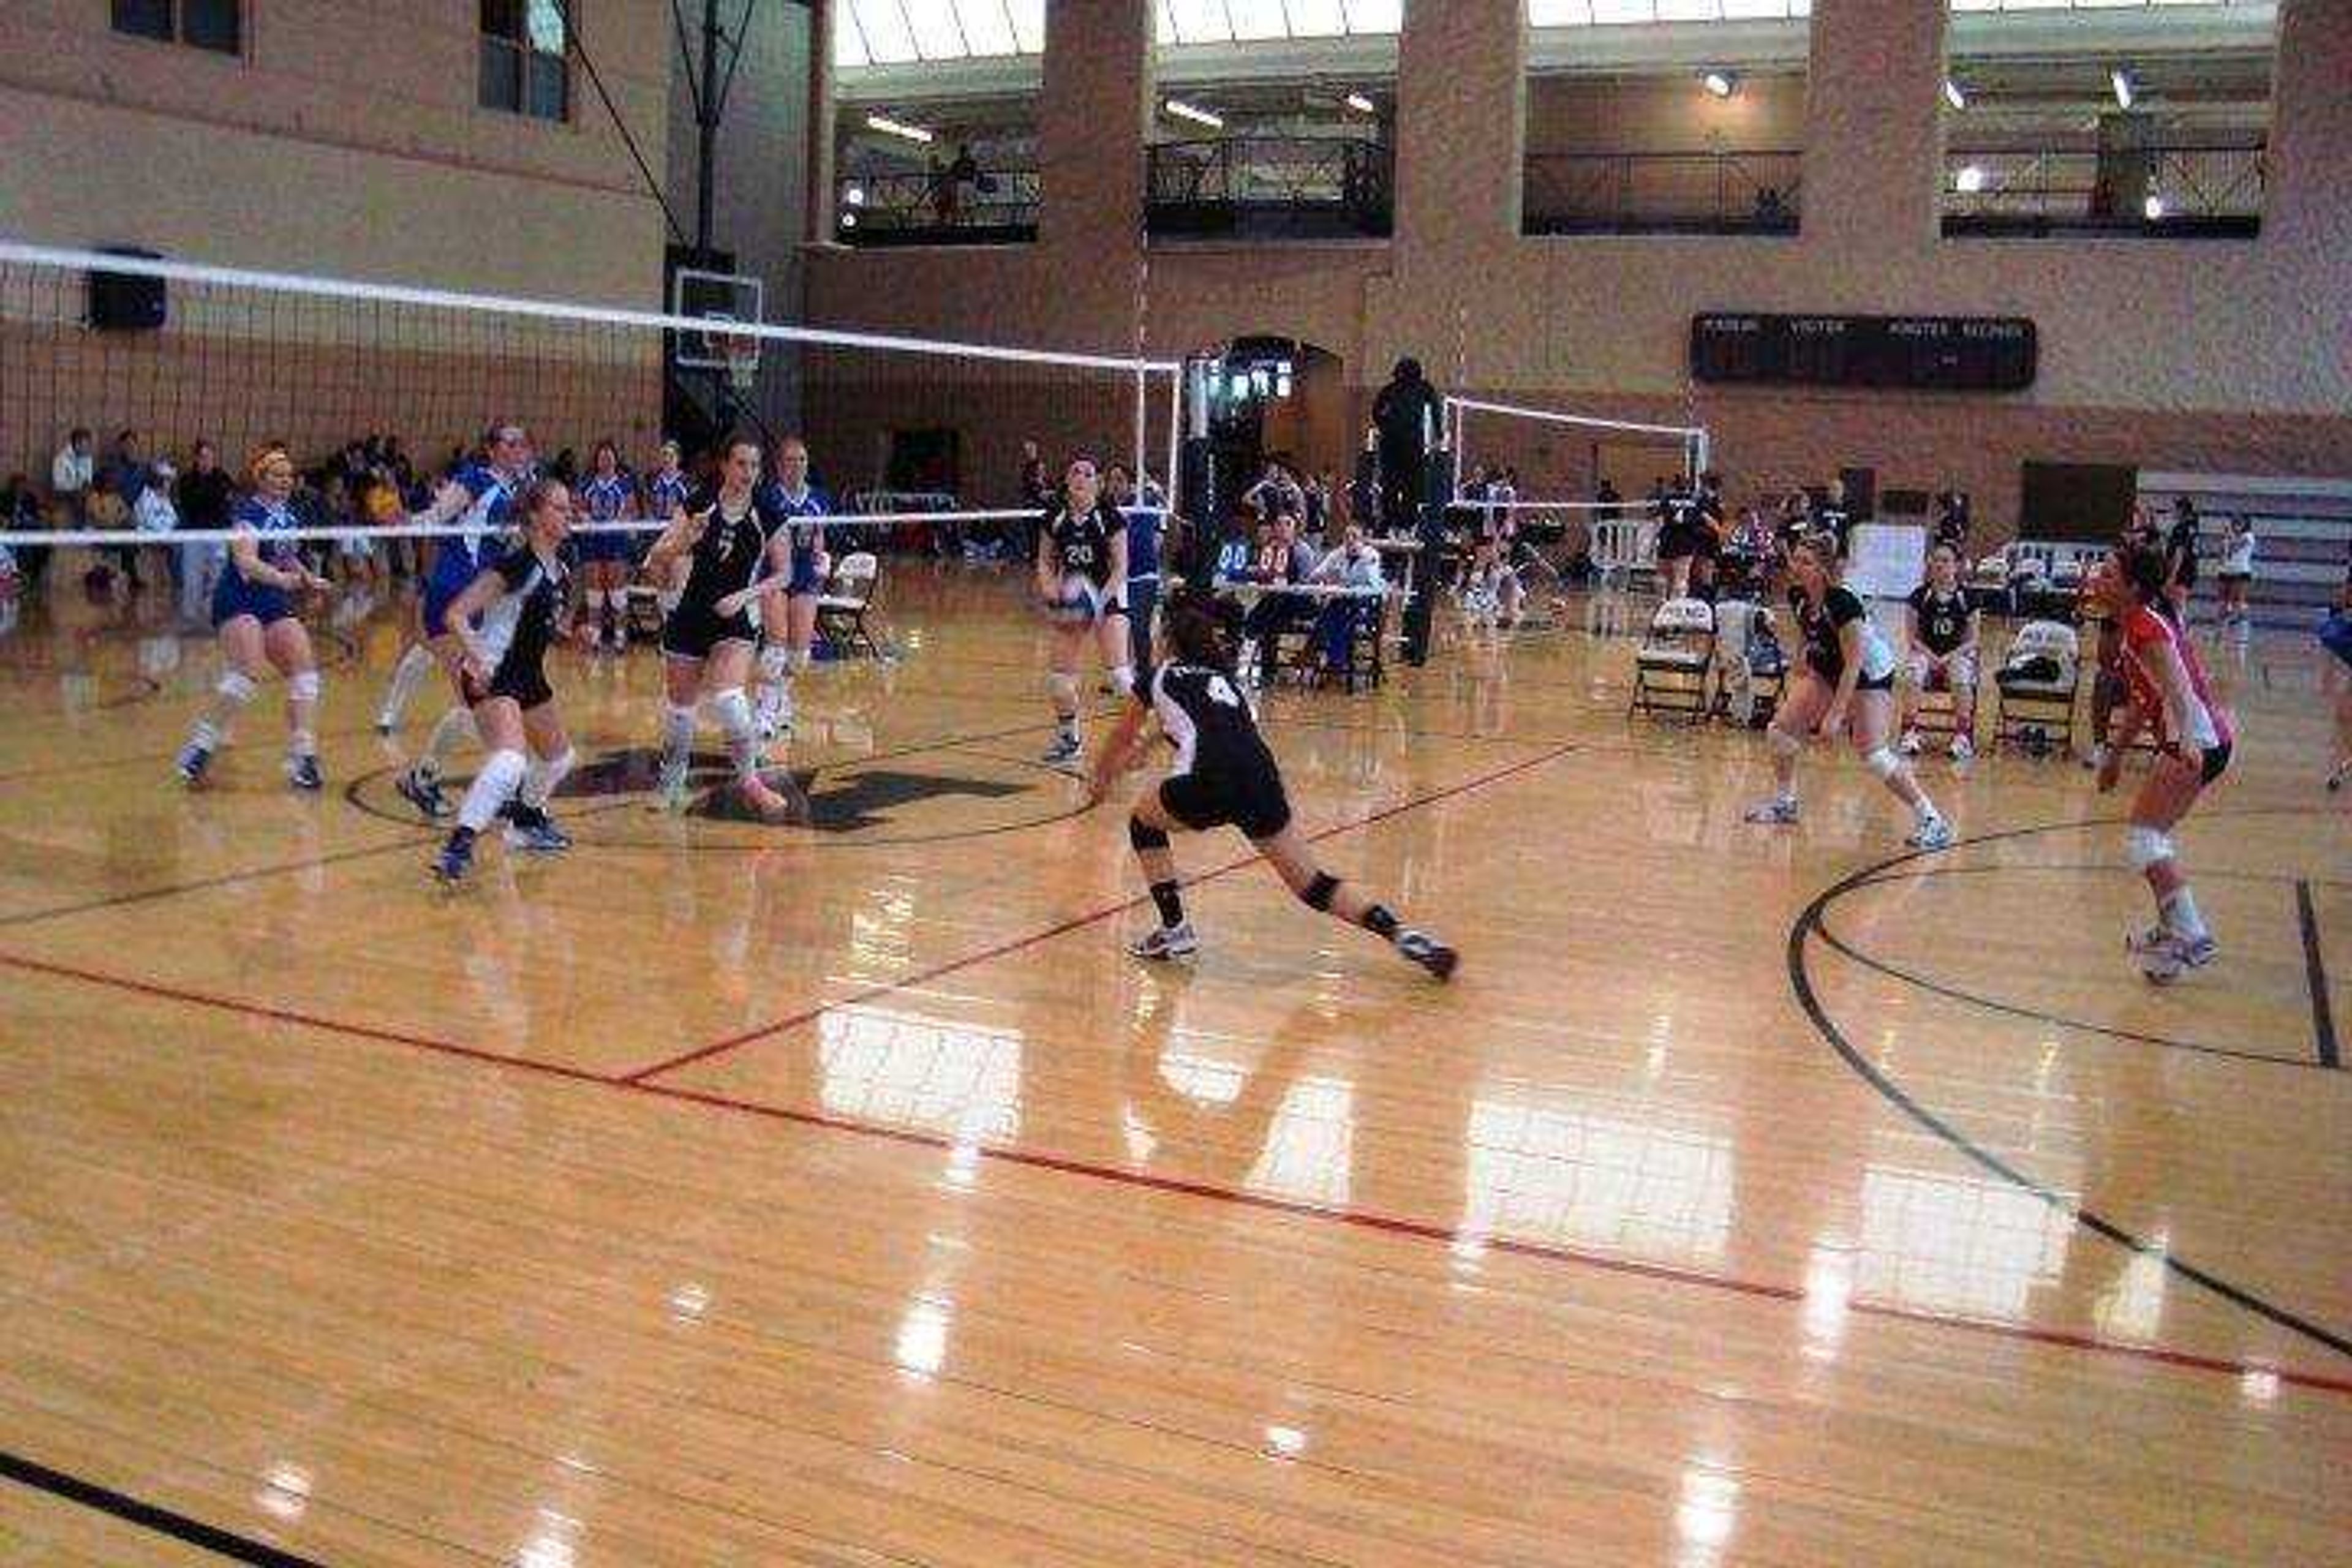 SPIKING with enthusiasm